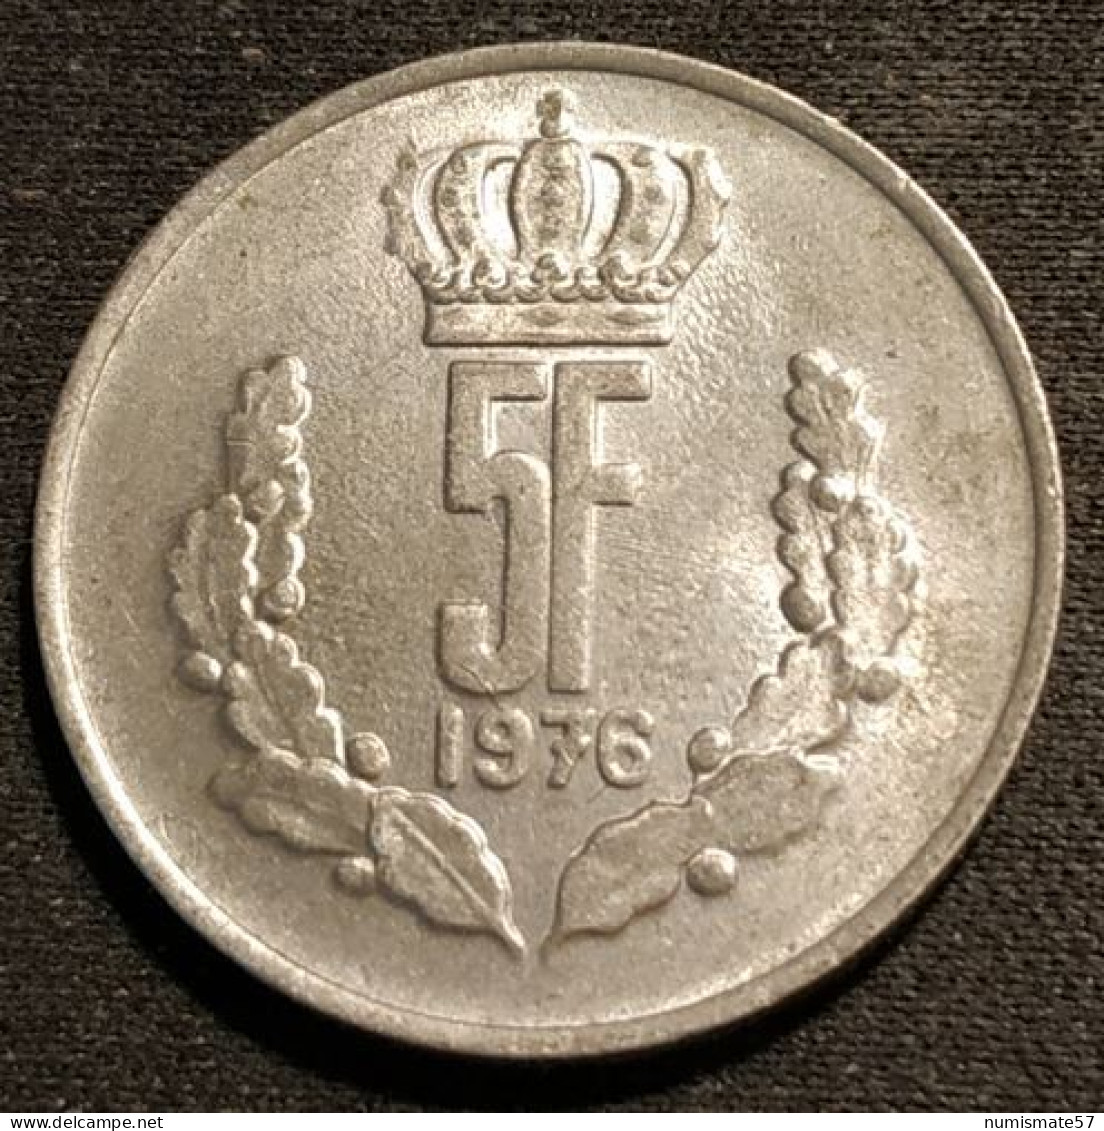 LUXEMBOURG - 5 FRANCS 1976 - Grand-Duc Jean - KM 56 - Luxemburg